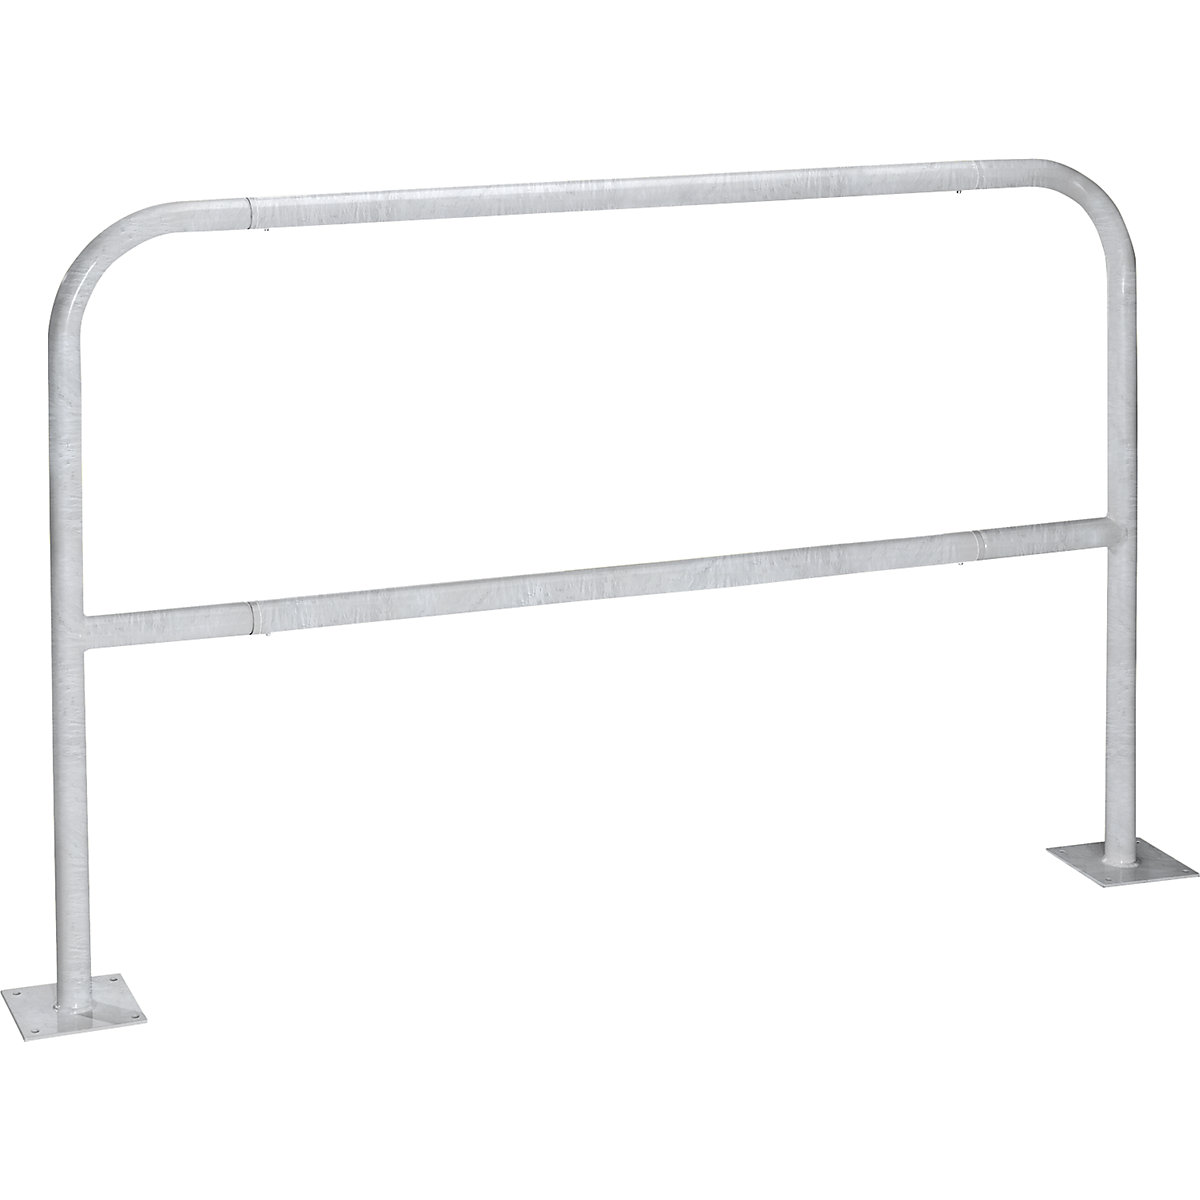 Safety rail for danger zones, to bolt in place, zinc plated, width 1500 mm-11